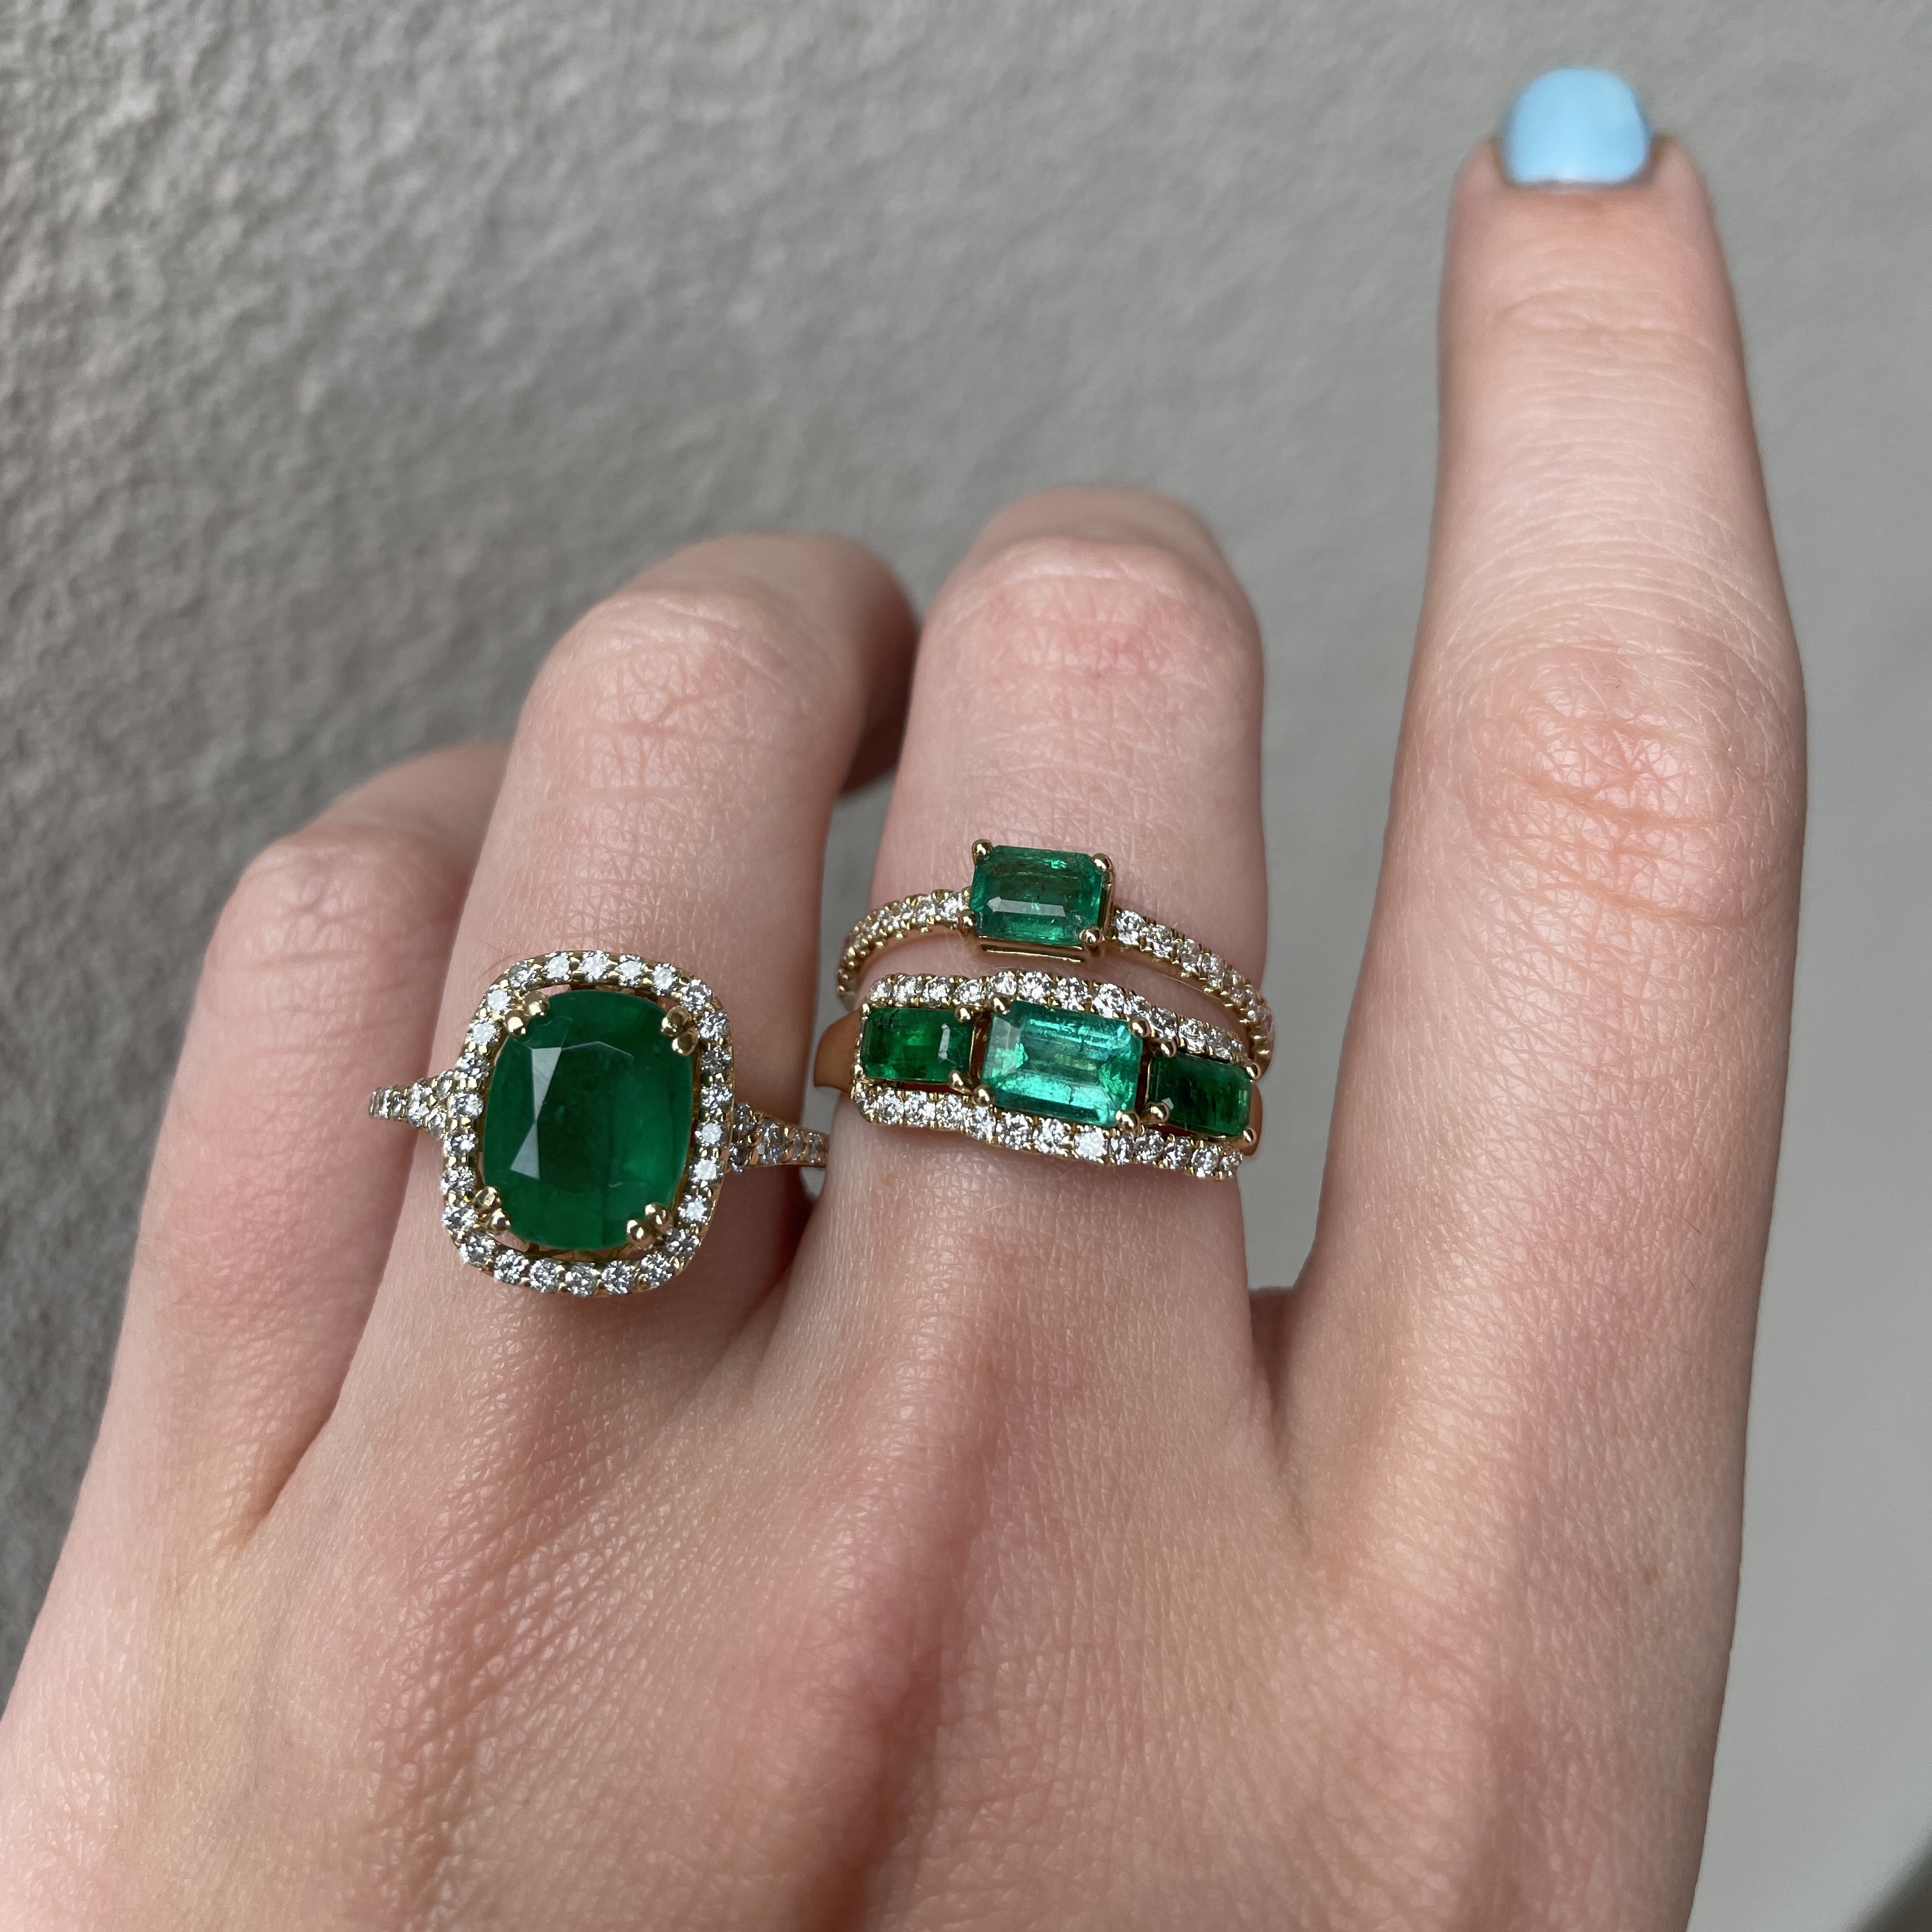 Yellow Gold Ring with Emerald and Diamonds